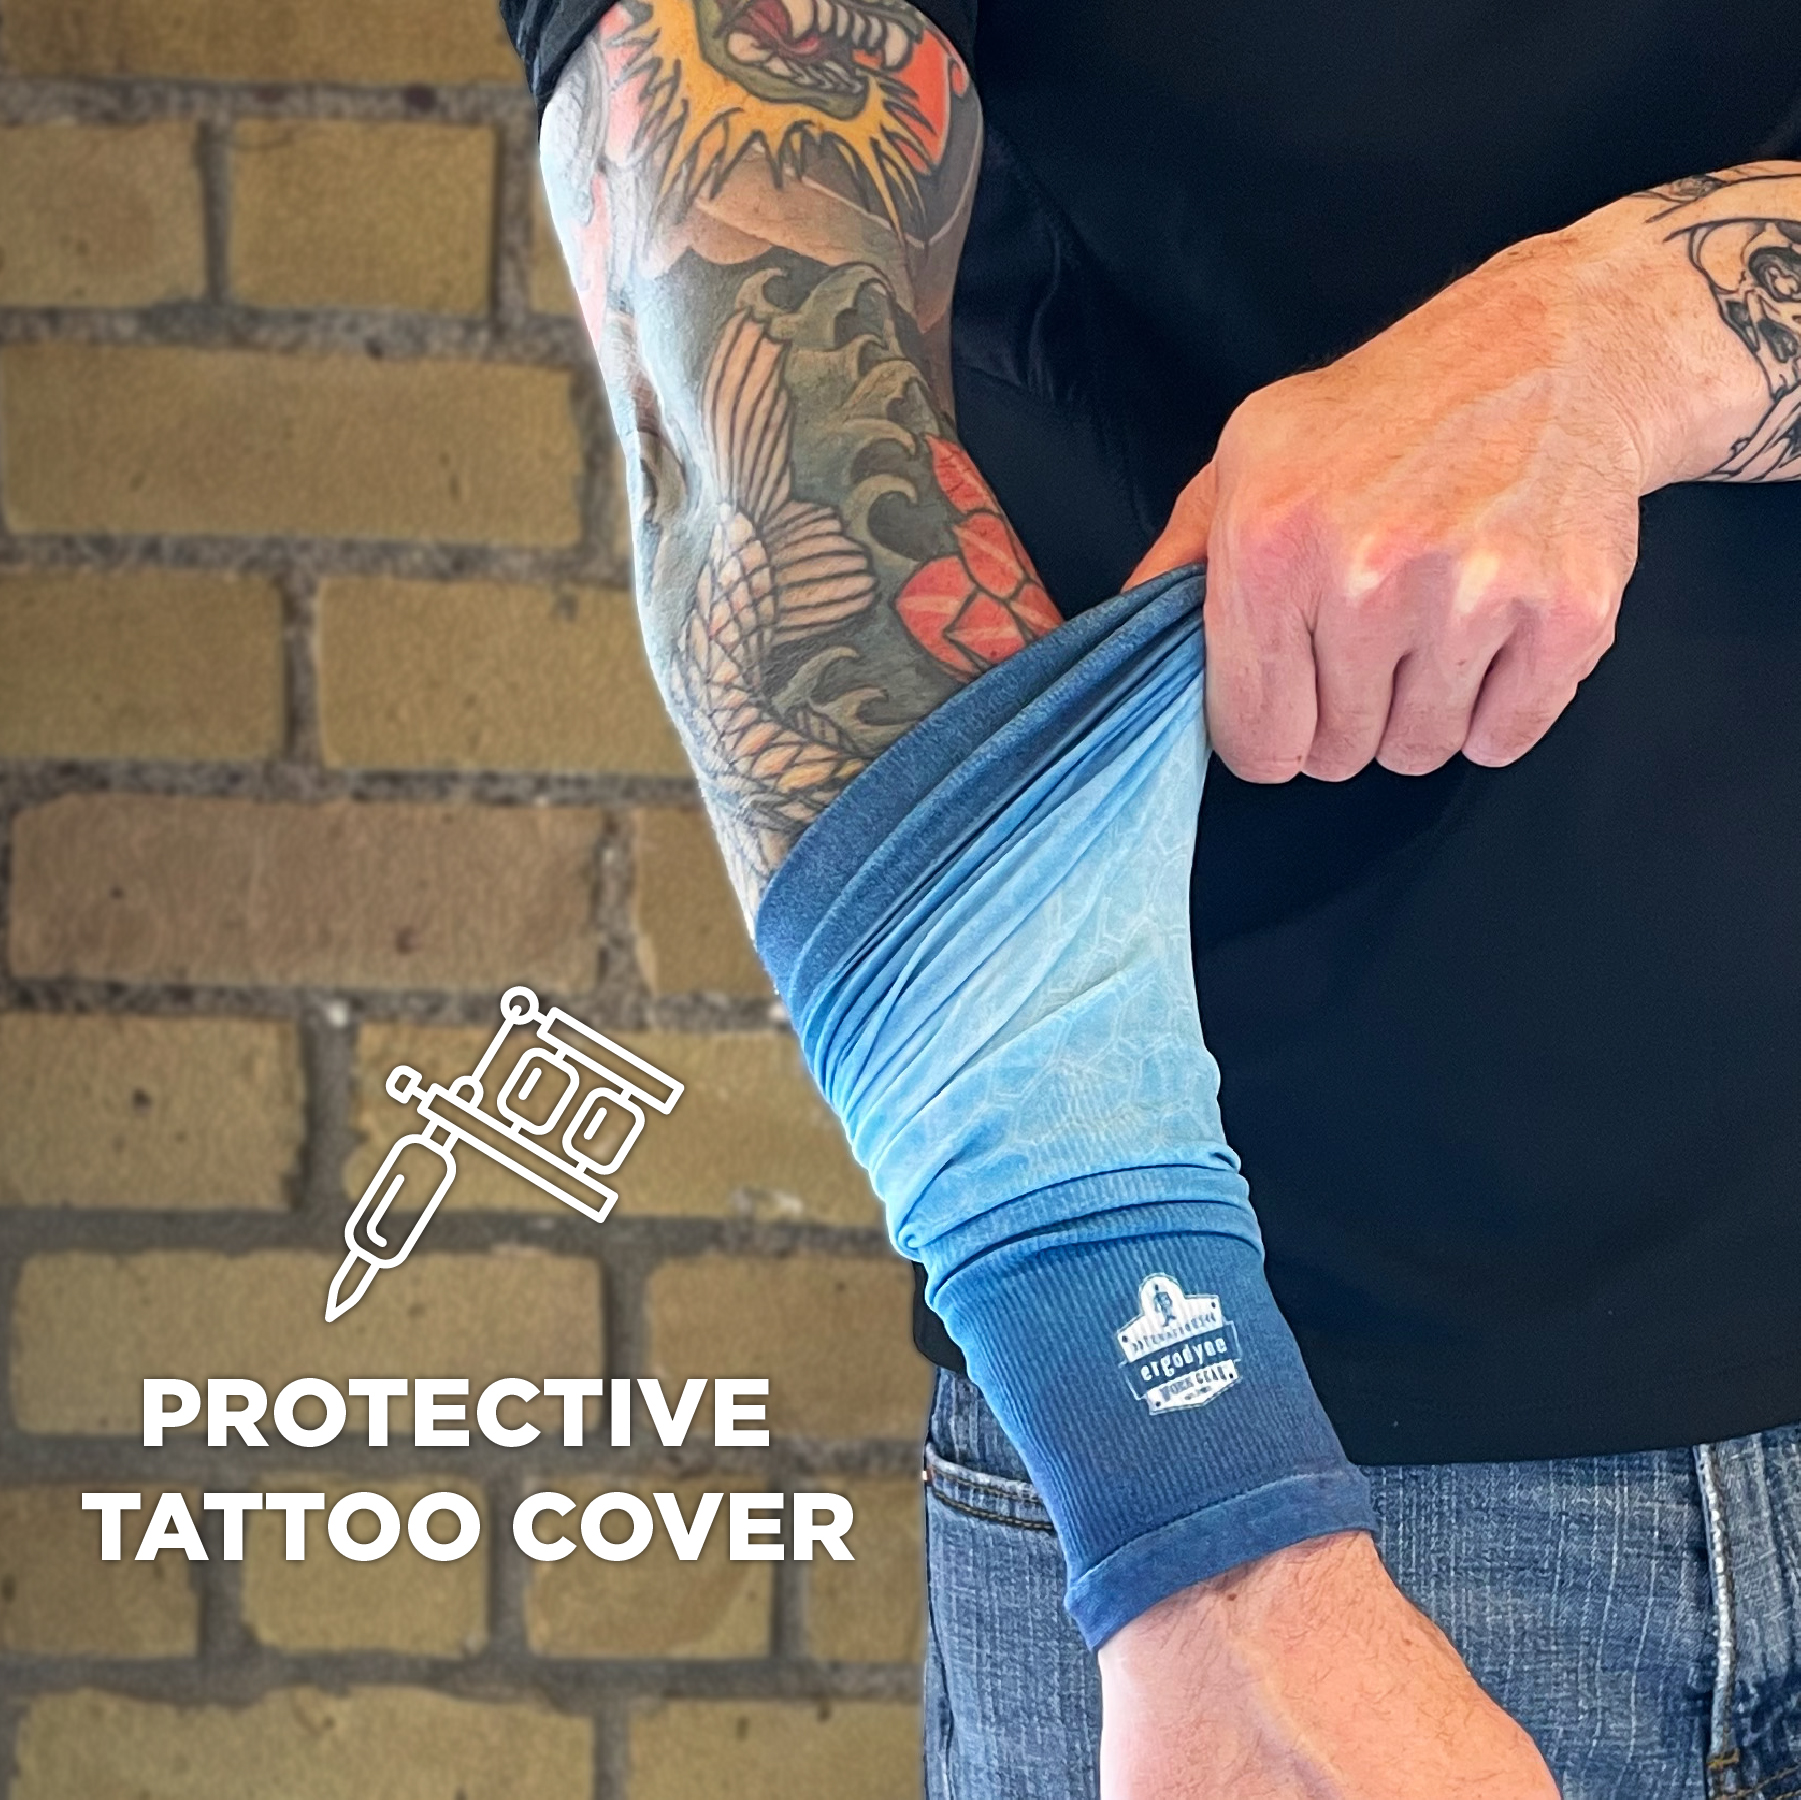 Summer Outdoor Mtb Knee Sleeves With 3D Tattoo Print Arm Sleeves For  Sports, Travel, Fishing, Sunscreen, And UV Protection From Tianhuosx, $5.33  | DHgate.Com